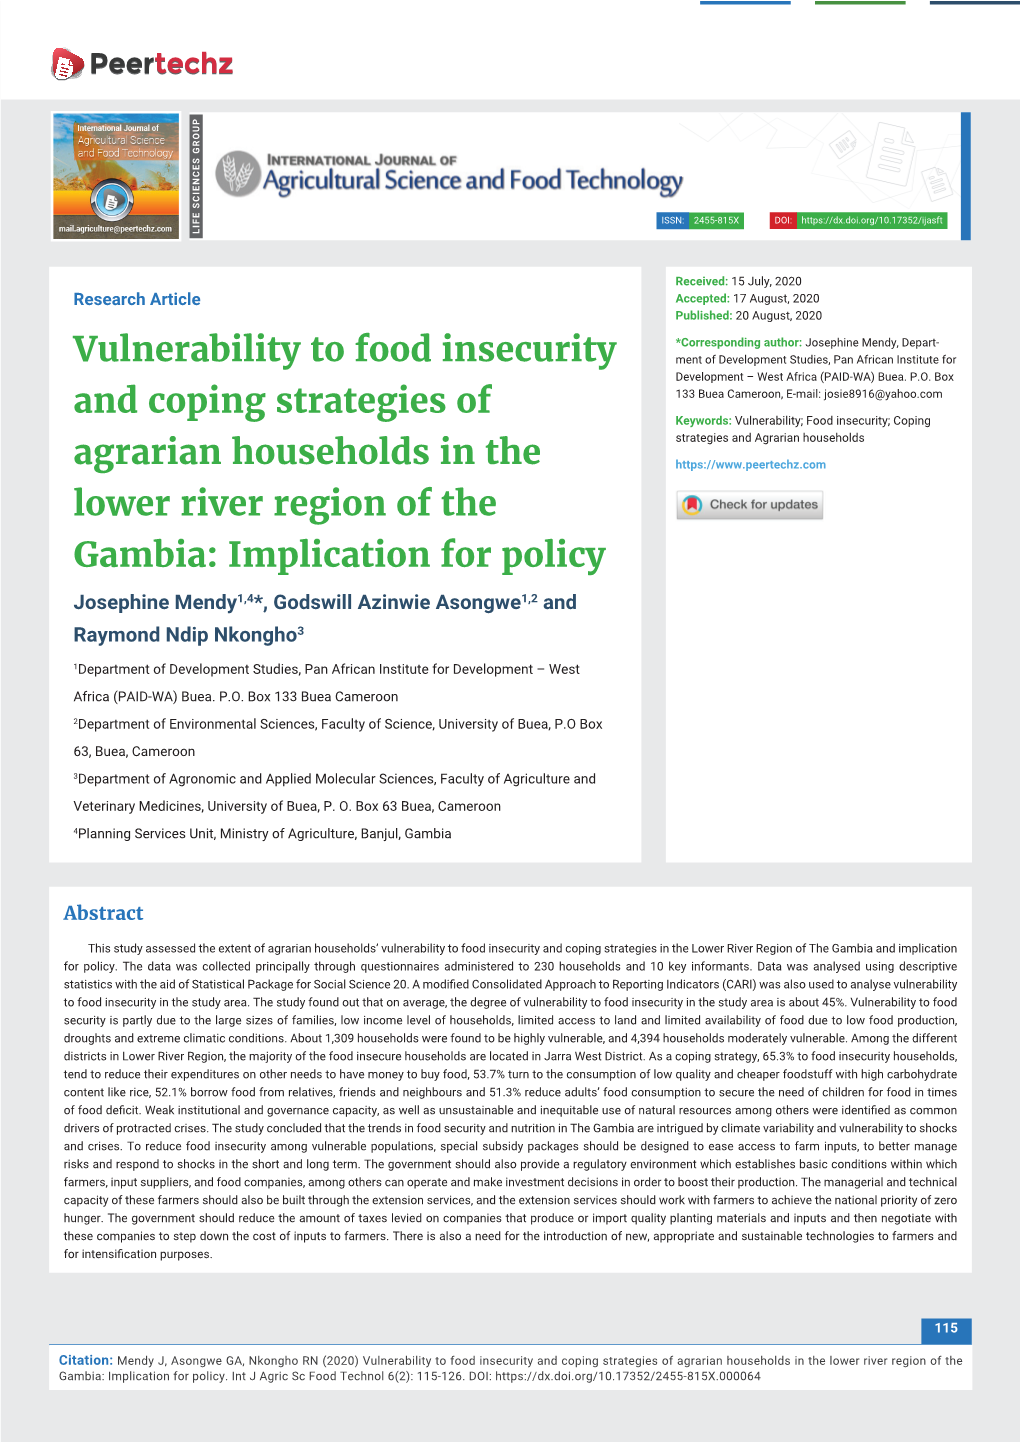 Vulnerability to Food Insecurity and Coping Strategies of Agrarian Households in the Lower River Region of the Gambia: Implication for Policy